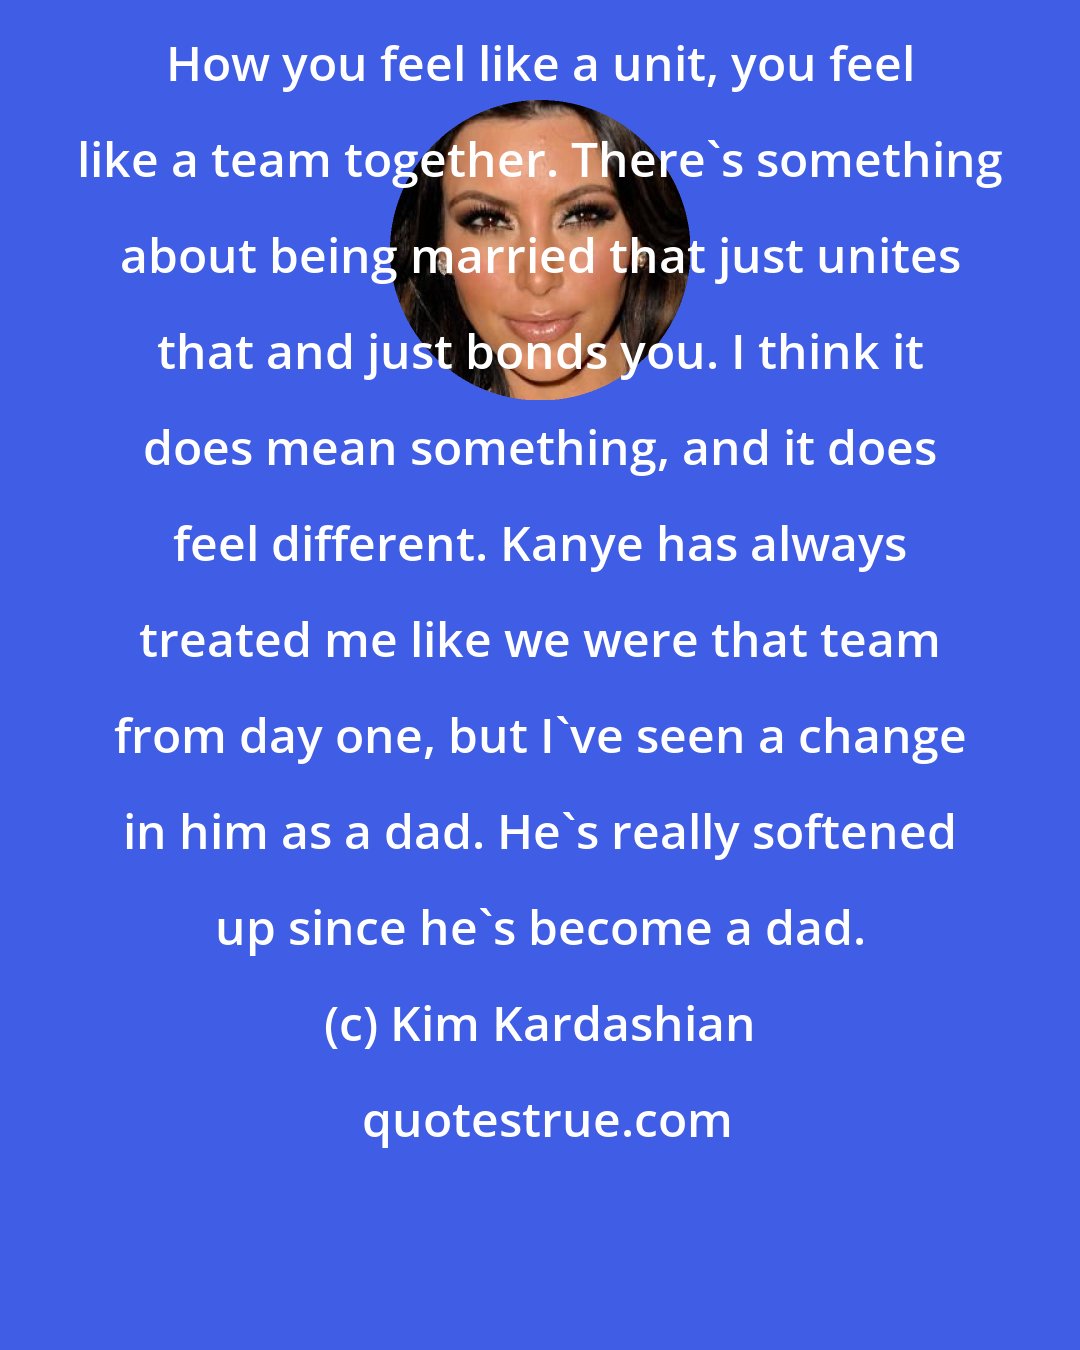 Kim Kardashian: How you feel like a unit, you feel like a team together. There's something about being married that just unites that and just bonds you. I think it does mean something, and it does feel different. Kanye has always treated me like we were that team from day one, but I've seen a change in him as a dad. He's really softened up since he's become a dad.